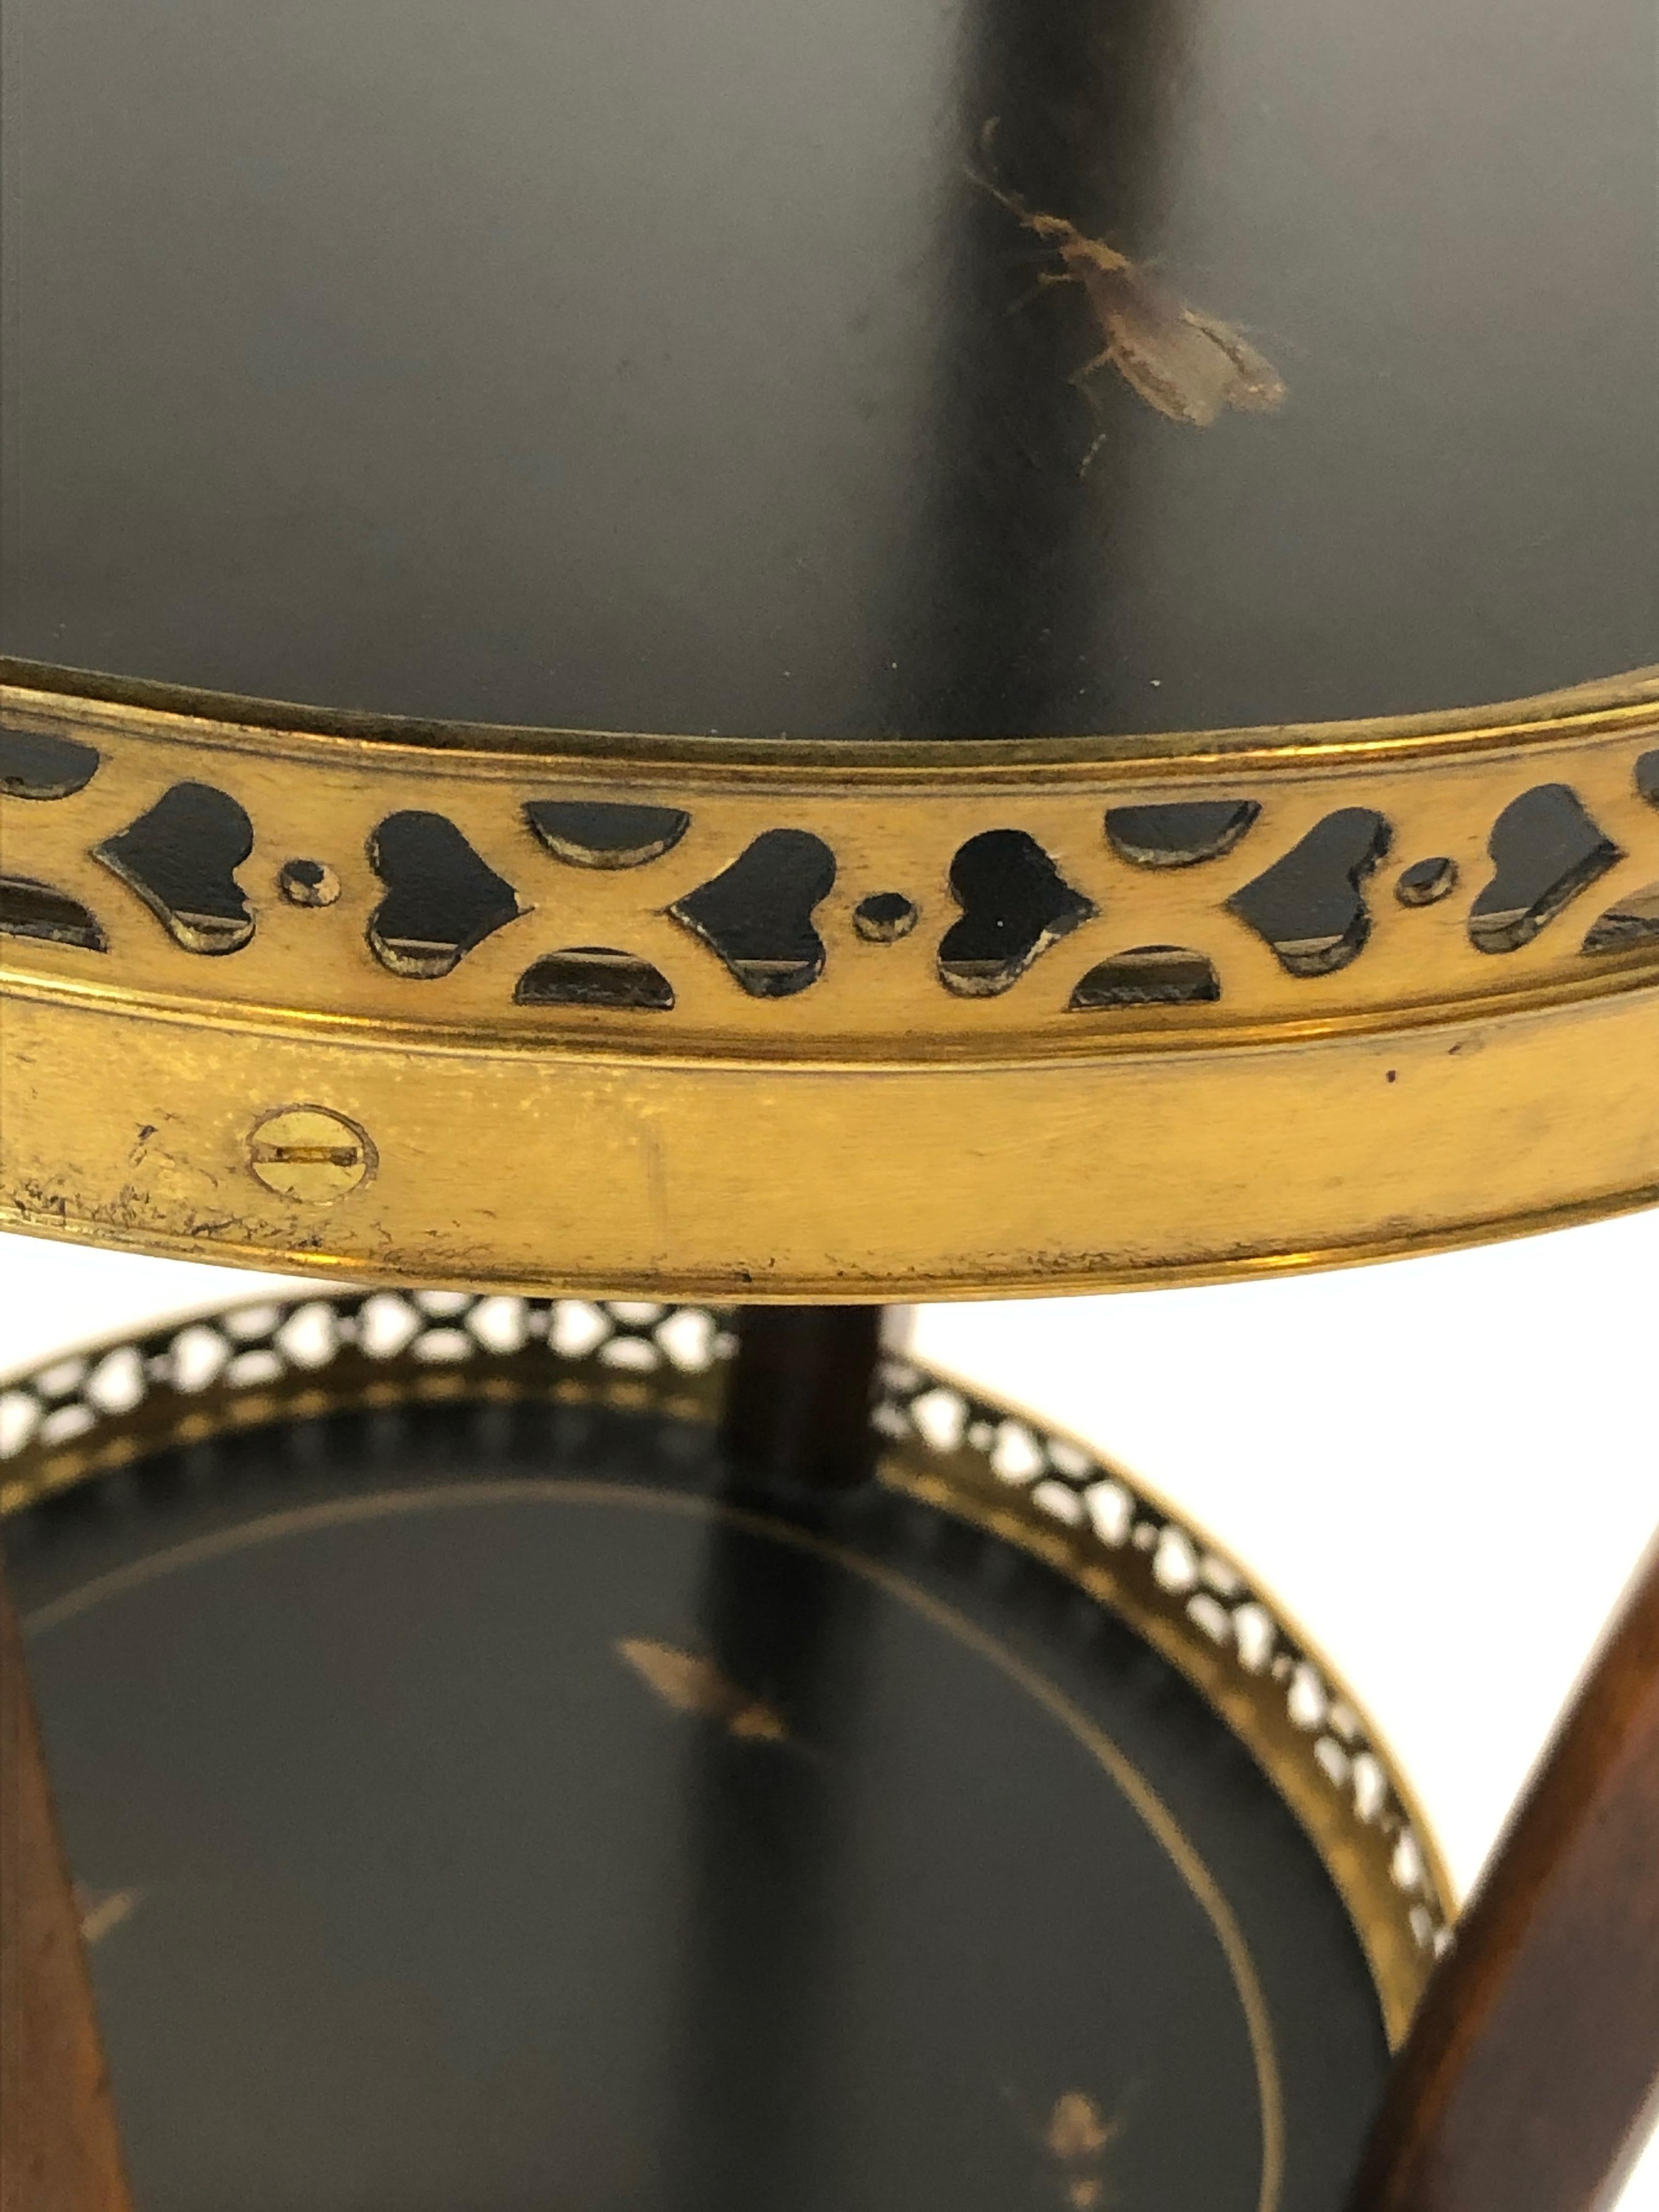 A pair of dramatic circular 4 tier stands having mahogany frames, ebonized and hand painted shelves with brass galleries, and beautiful brownish gold renderings of assorted insects.
Top level 12 inches diameter; #2 14 inches #3 13 inches #4 10